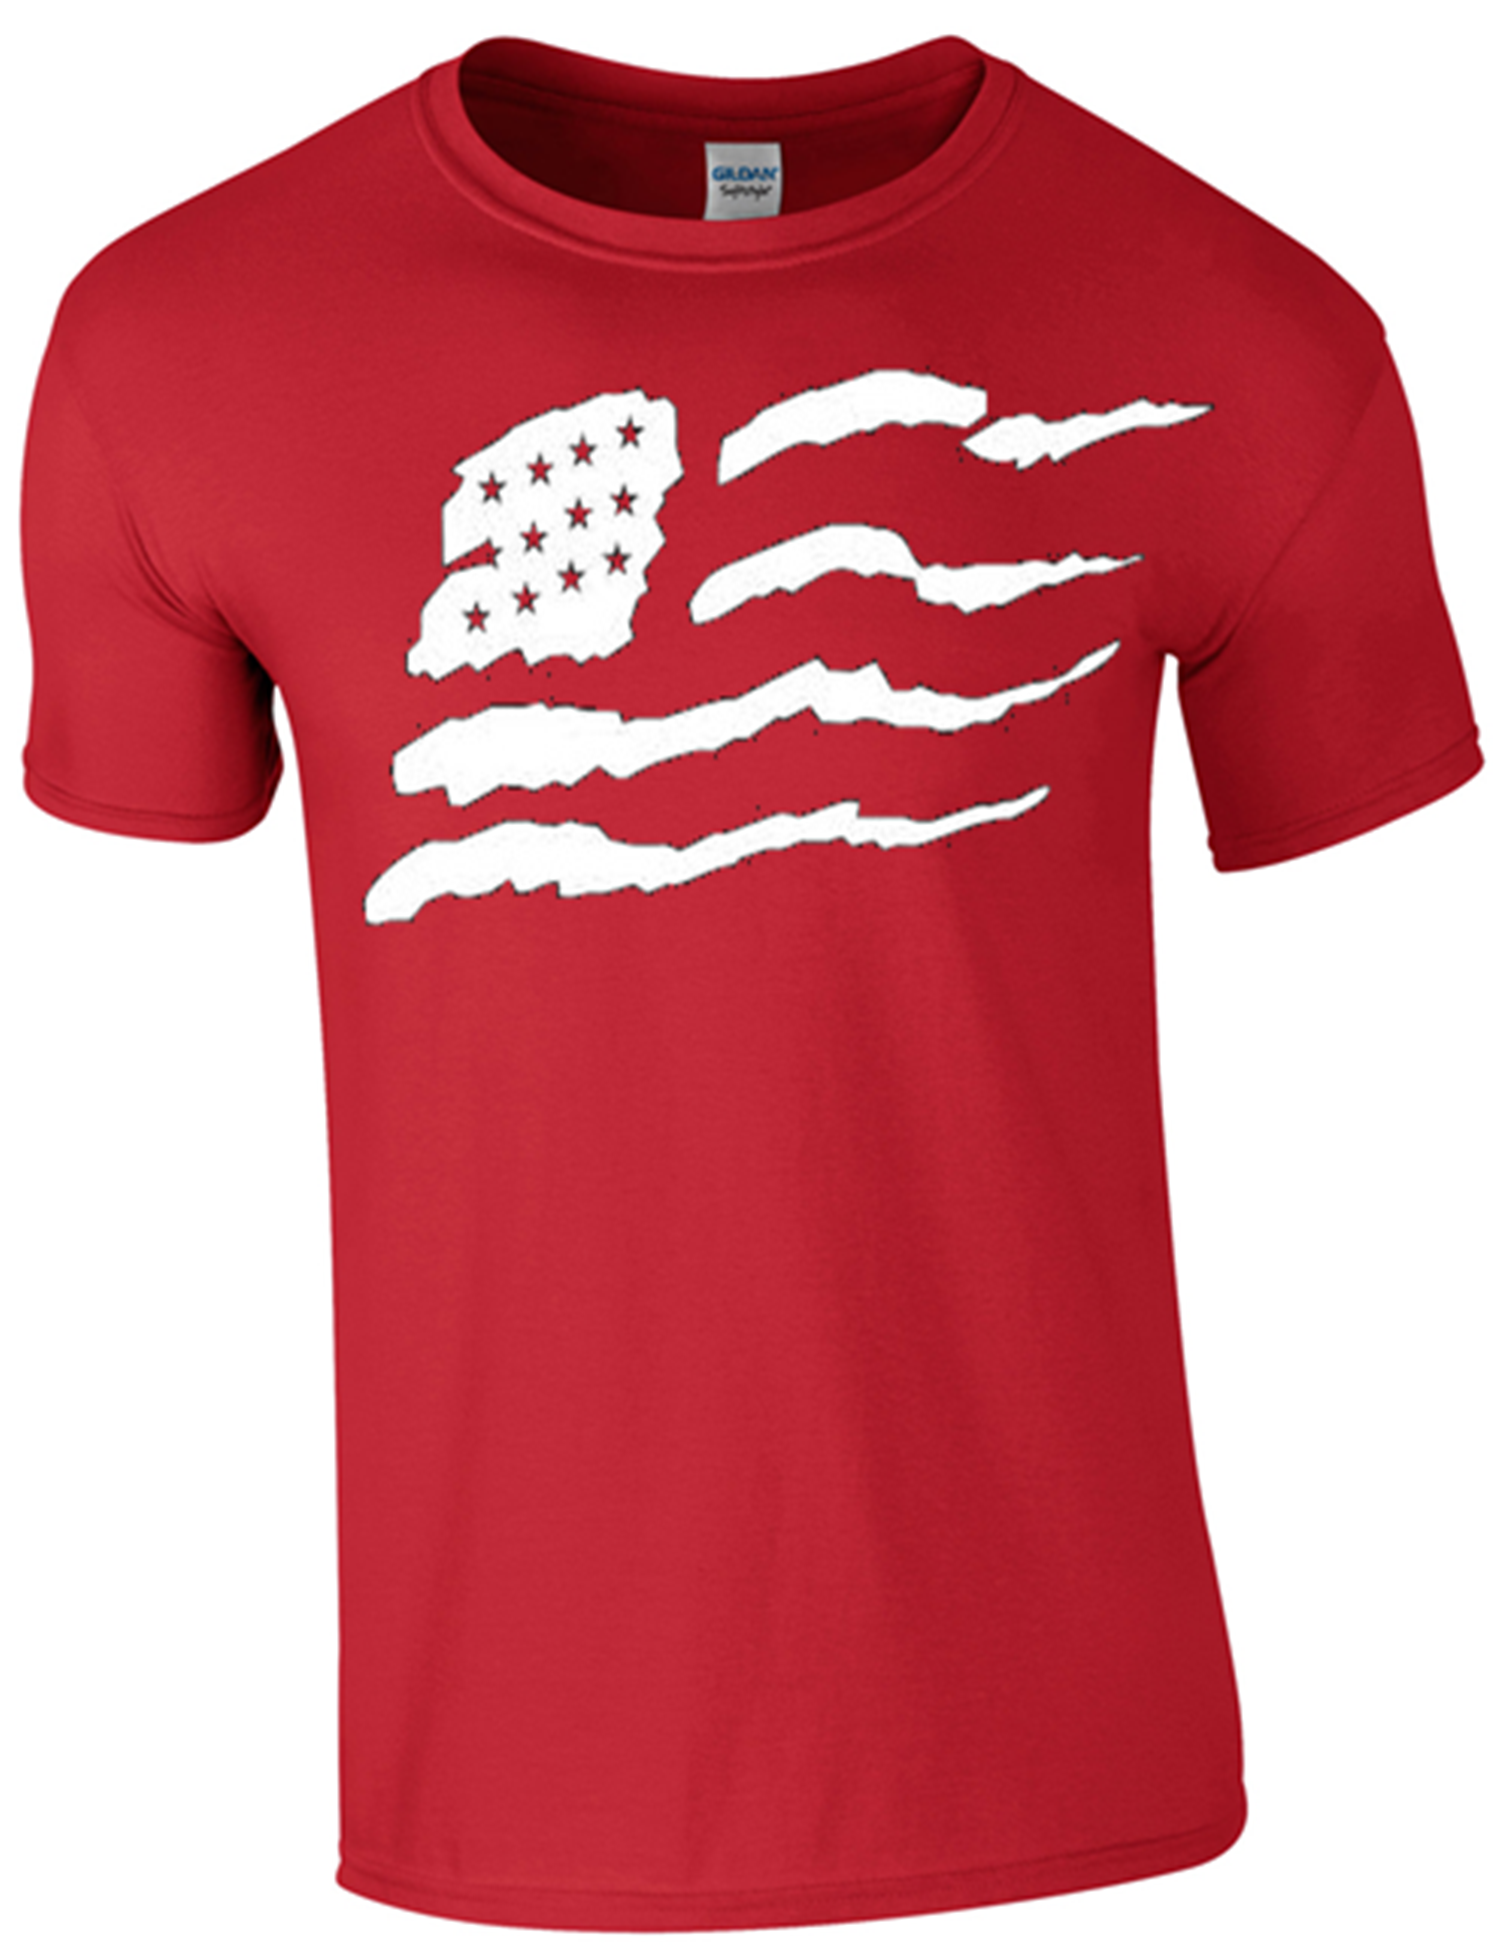 Stars & Stripes T-Shirt Printed DTG (Direct to Garment) for a Permanent Finish. - Army 1157 kit S / Red Army 1157 Kit Veterans Owned Business